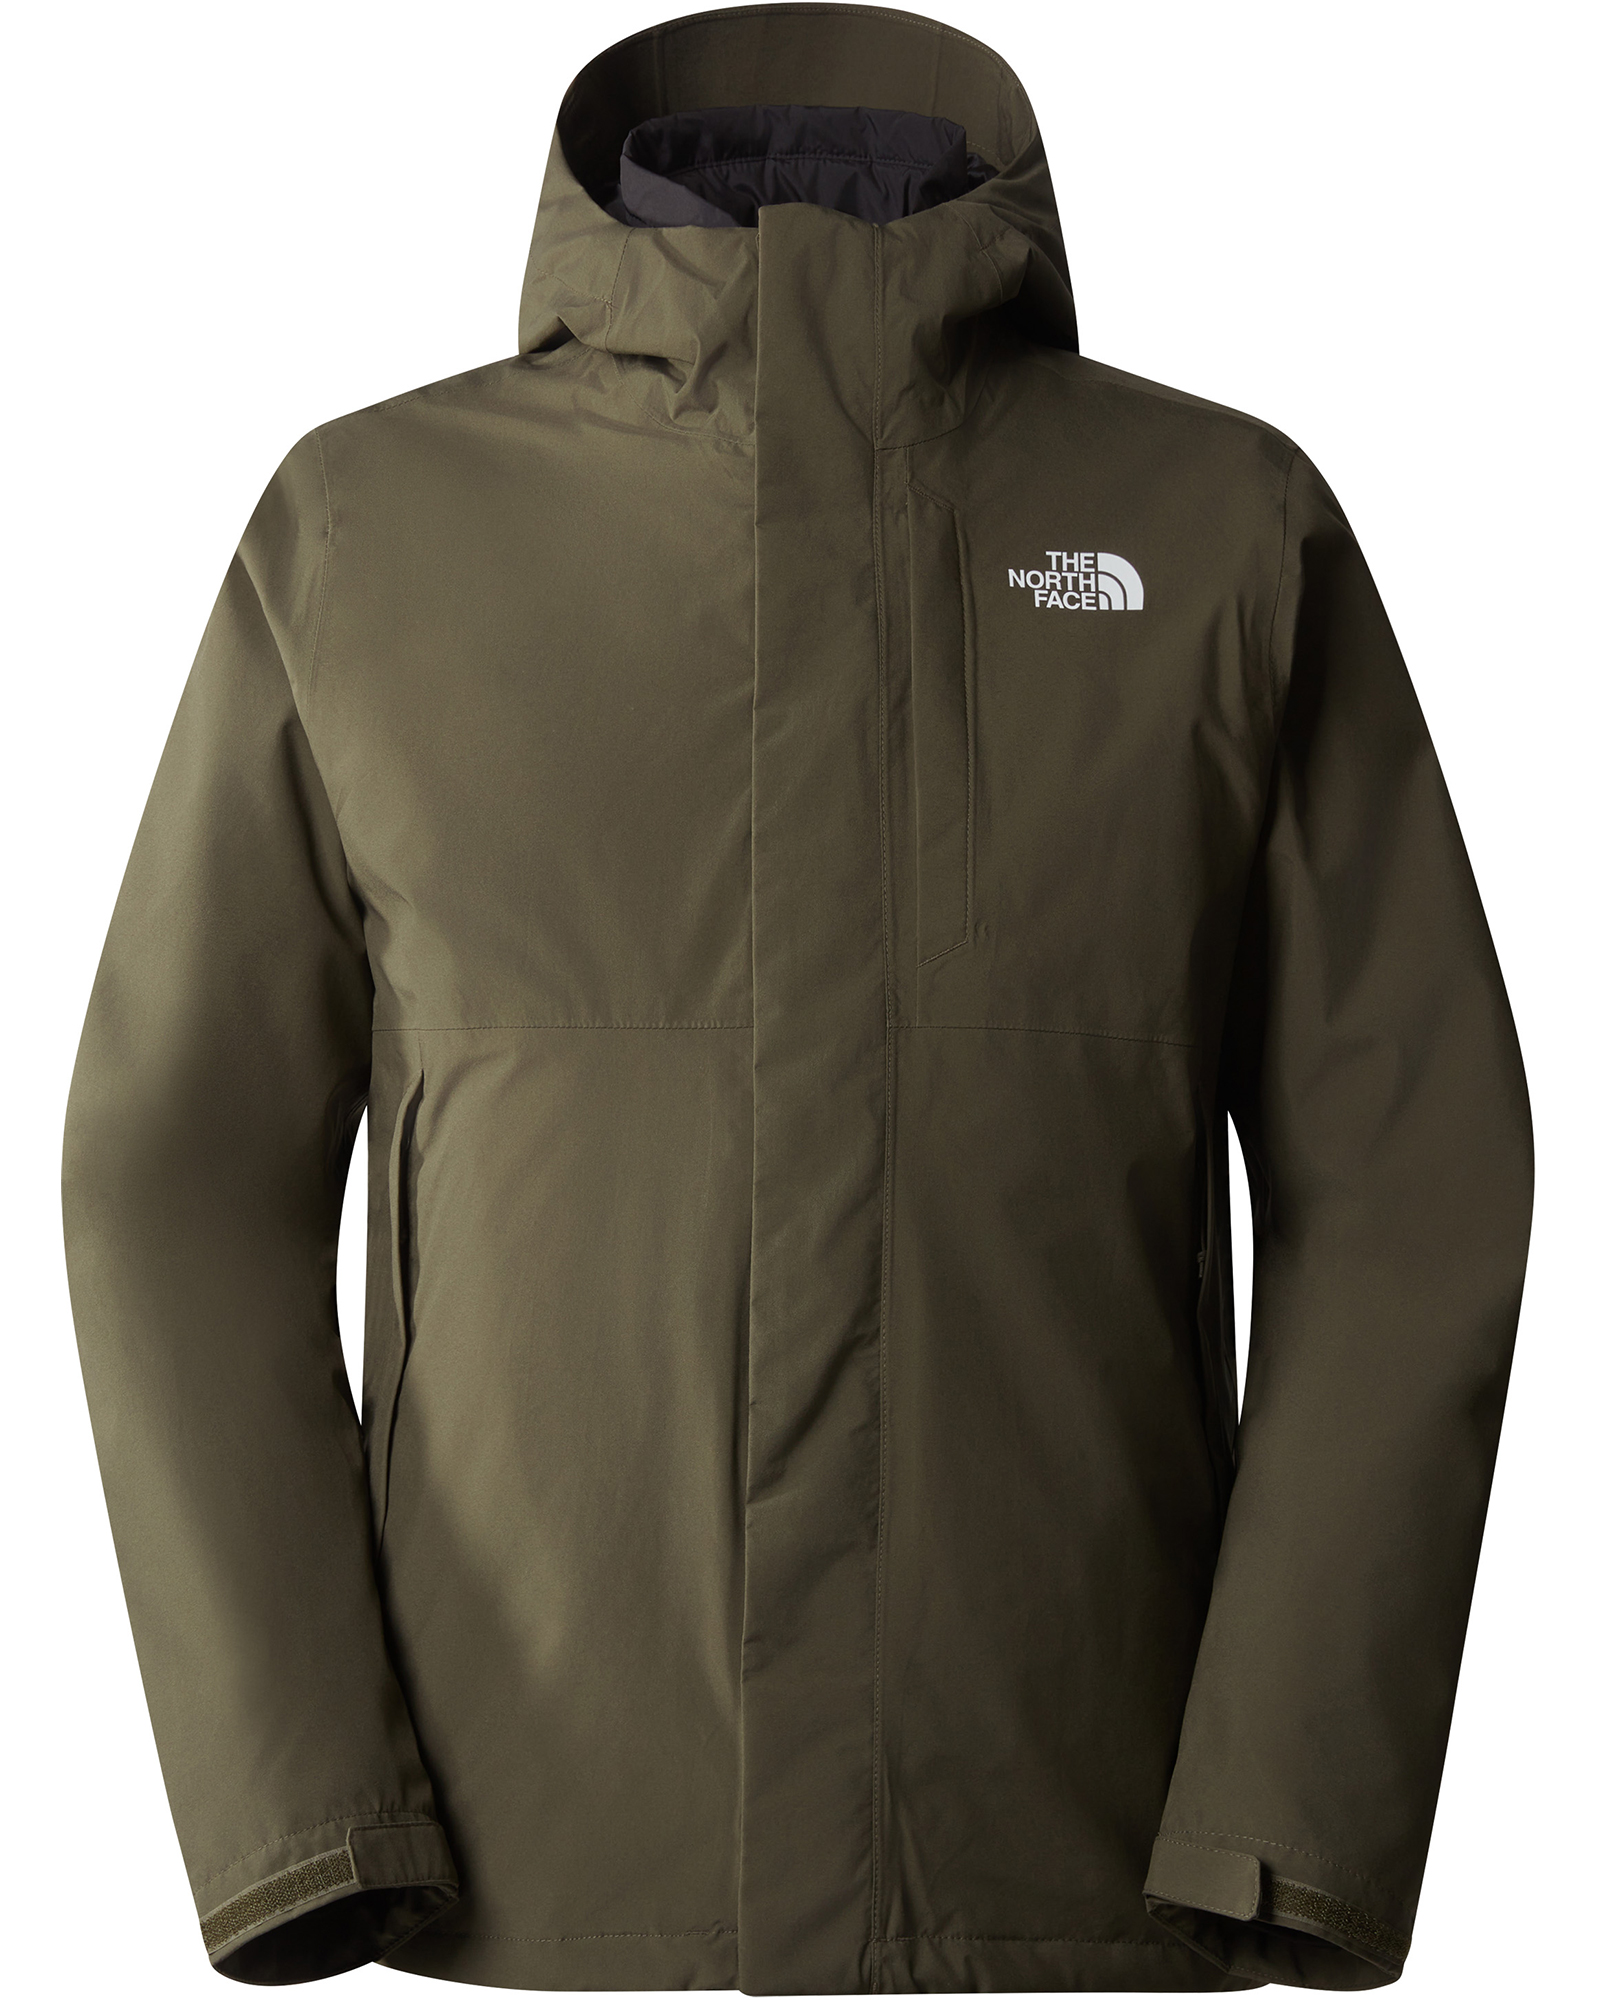 The North Face Carto Men’s Triclimate Jacket - New Taupe Green-TNF Black M